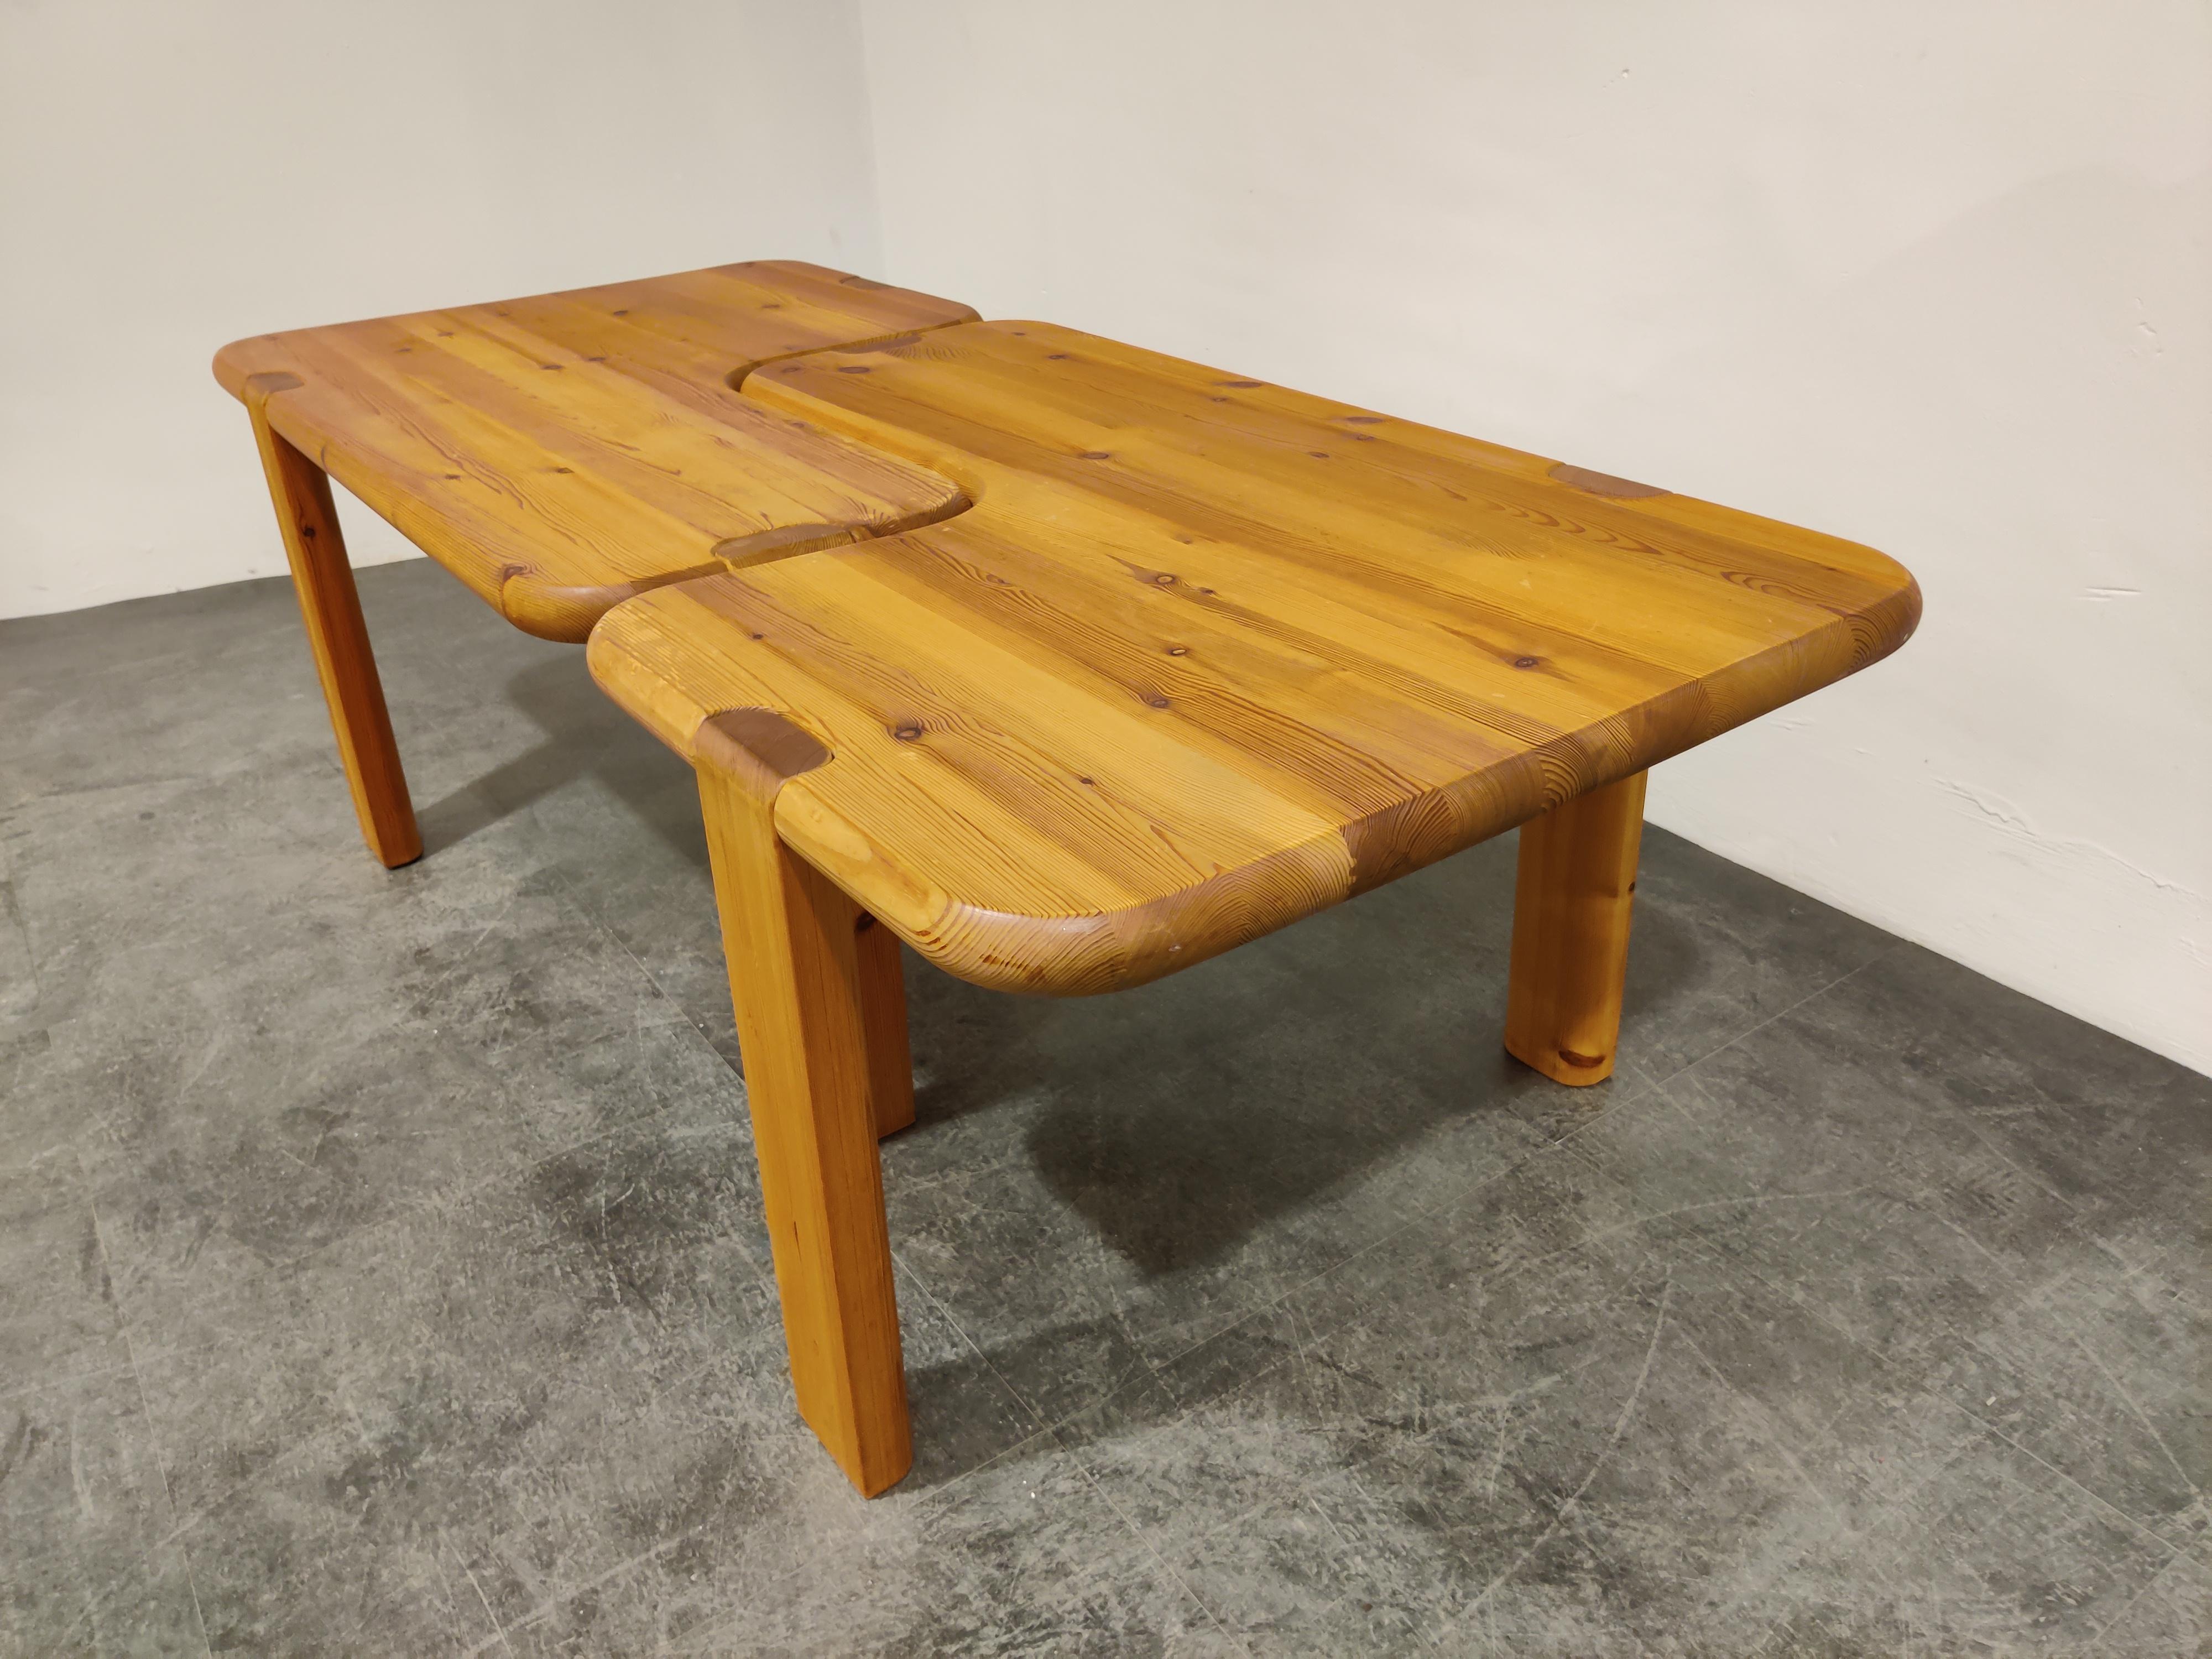 Midcentury solid pine wooden coffee or side tables designed by Aksel Kjersgaard for Odder furniture.

Pure Scandinavian quality and design from the 1960s, and rare pieces.

Very good condition, stamped underneath the table top. 

Can be used